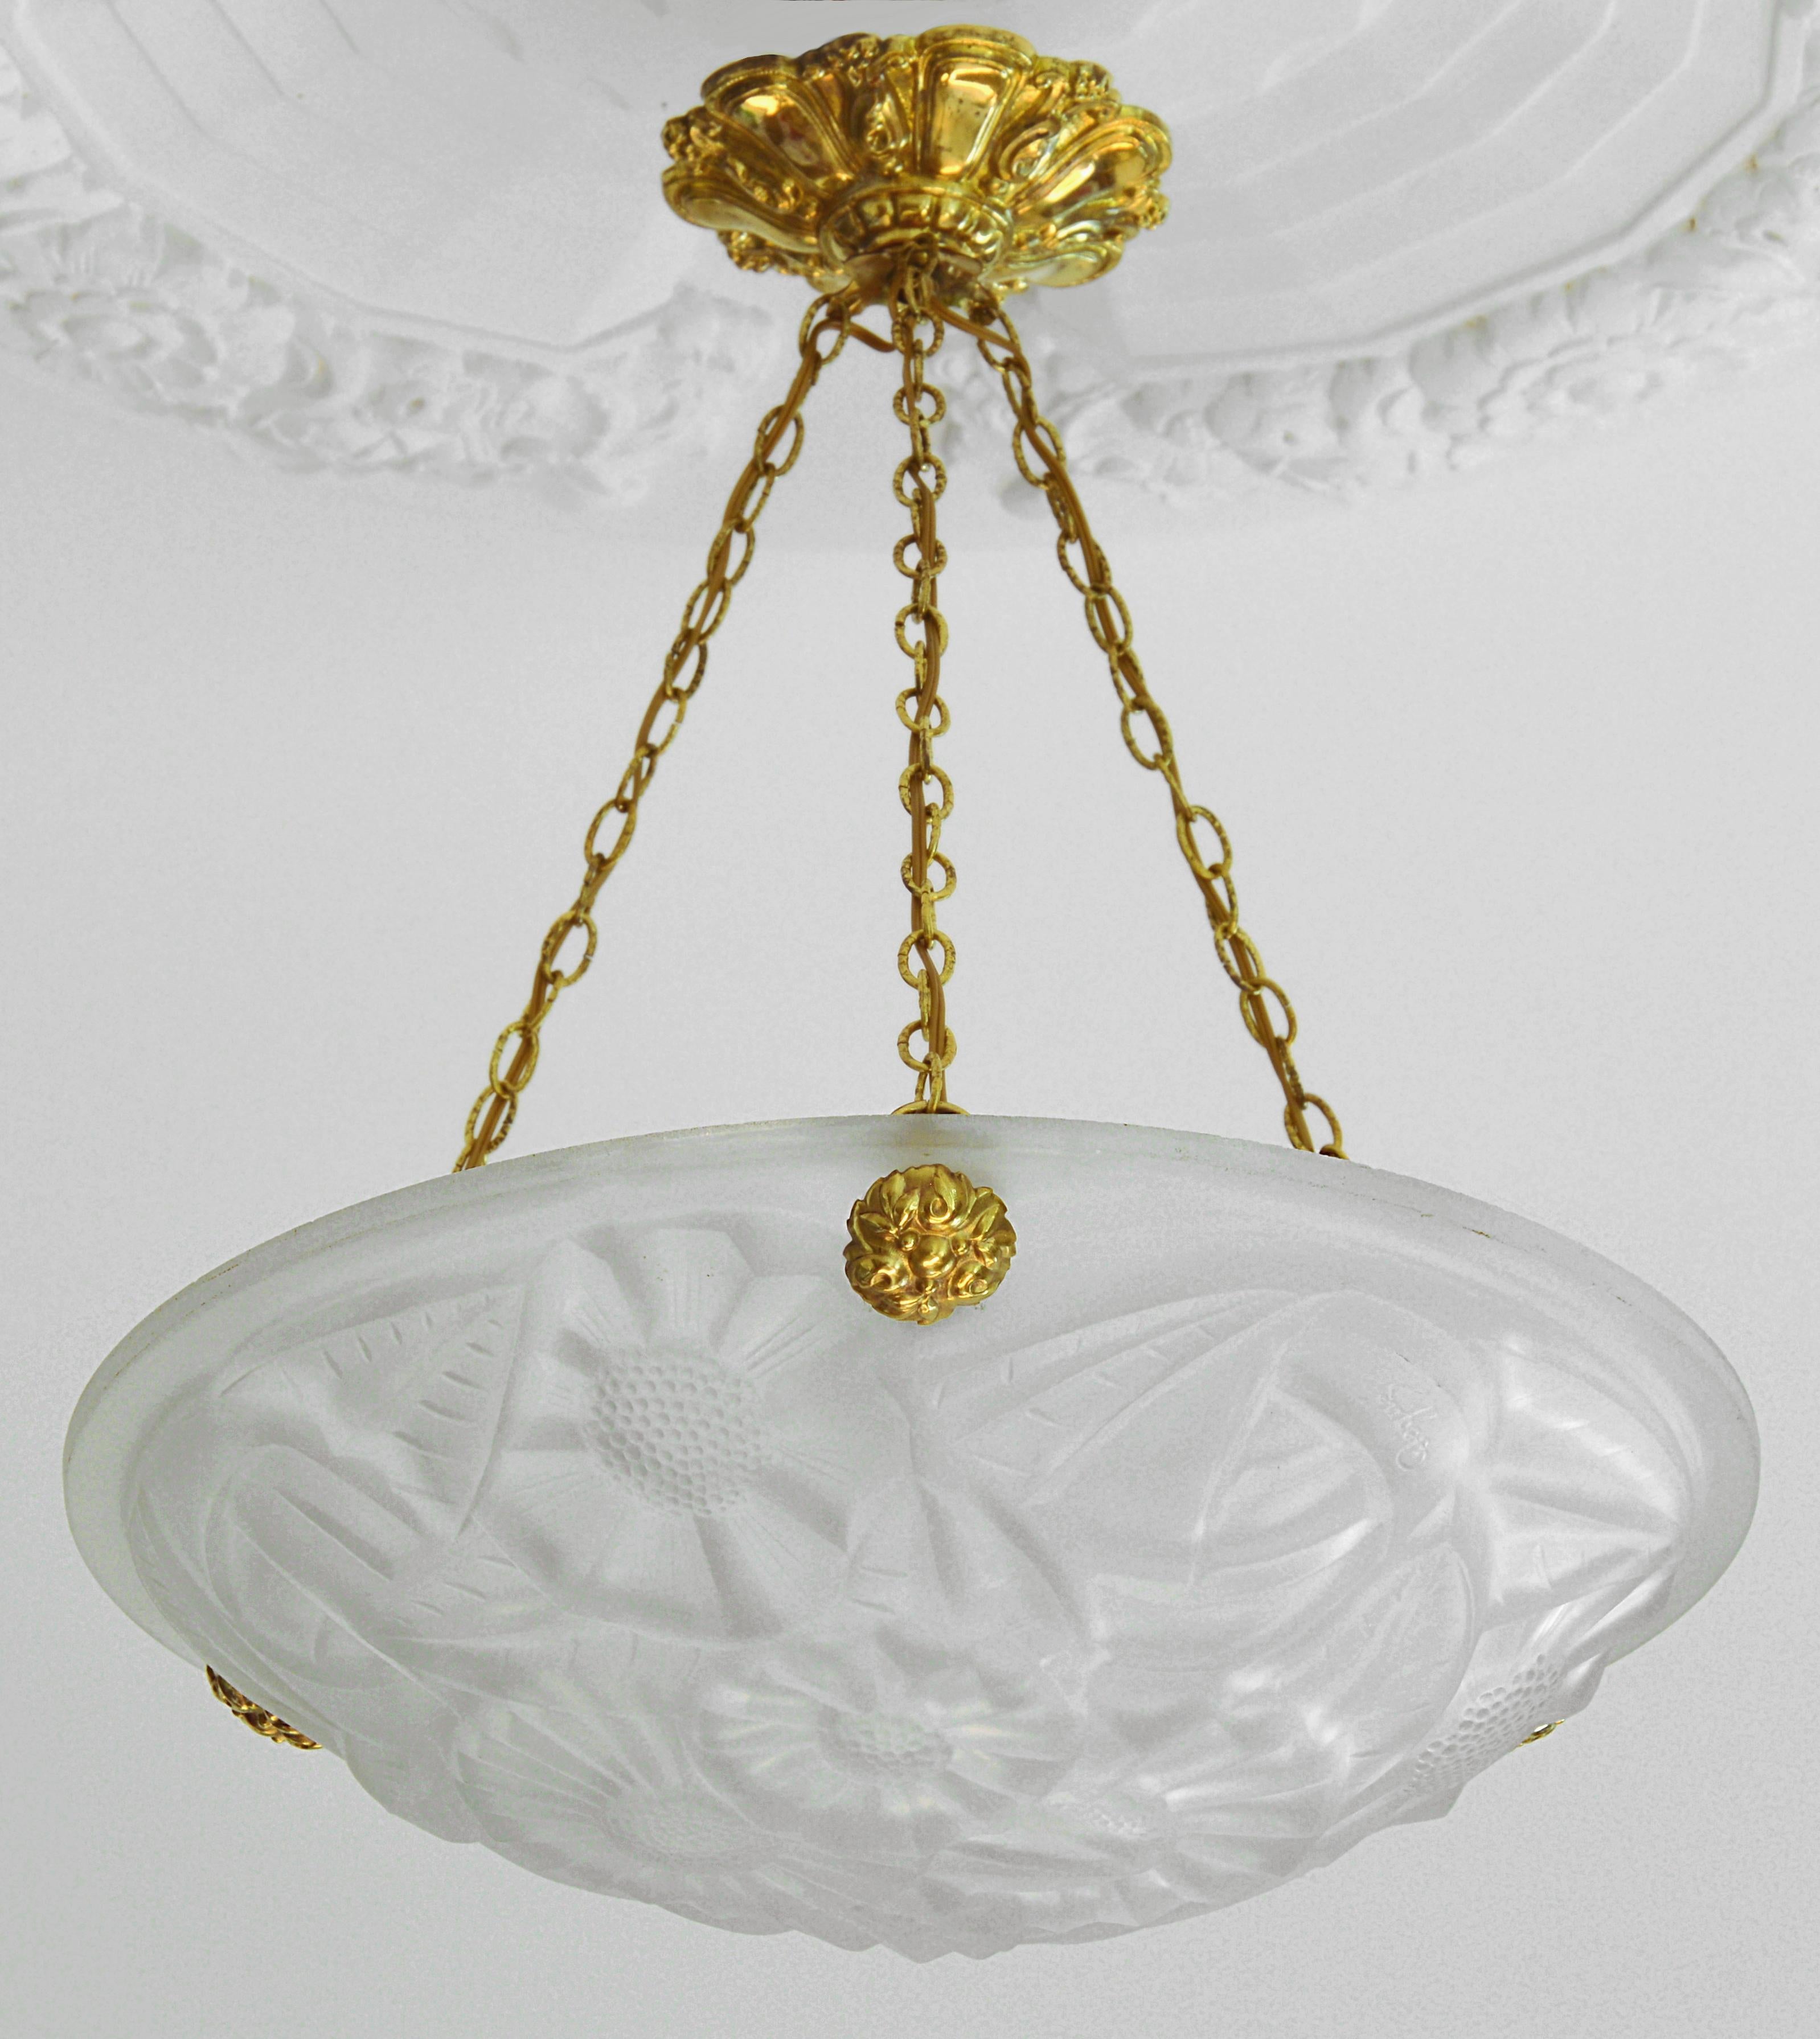 French Art Deco chandelier by Degue, Compiegne, France, late 1920s. Thick molded glass shade showing a floral pattern. Stamped brass fixture.
Signed 